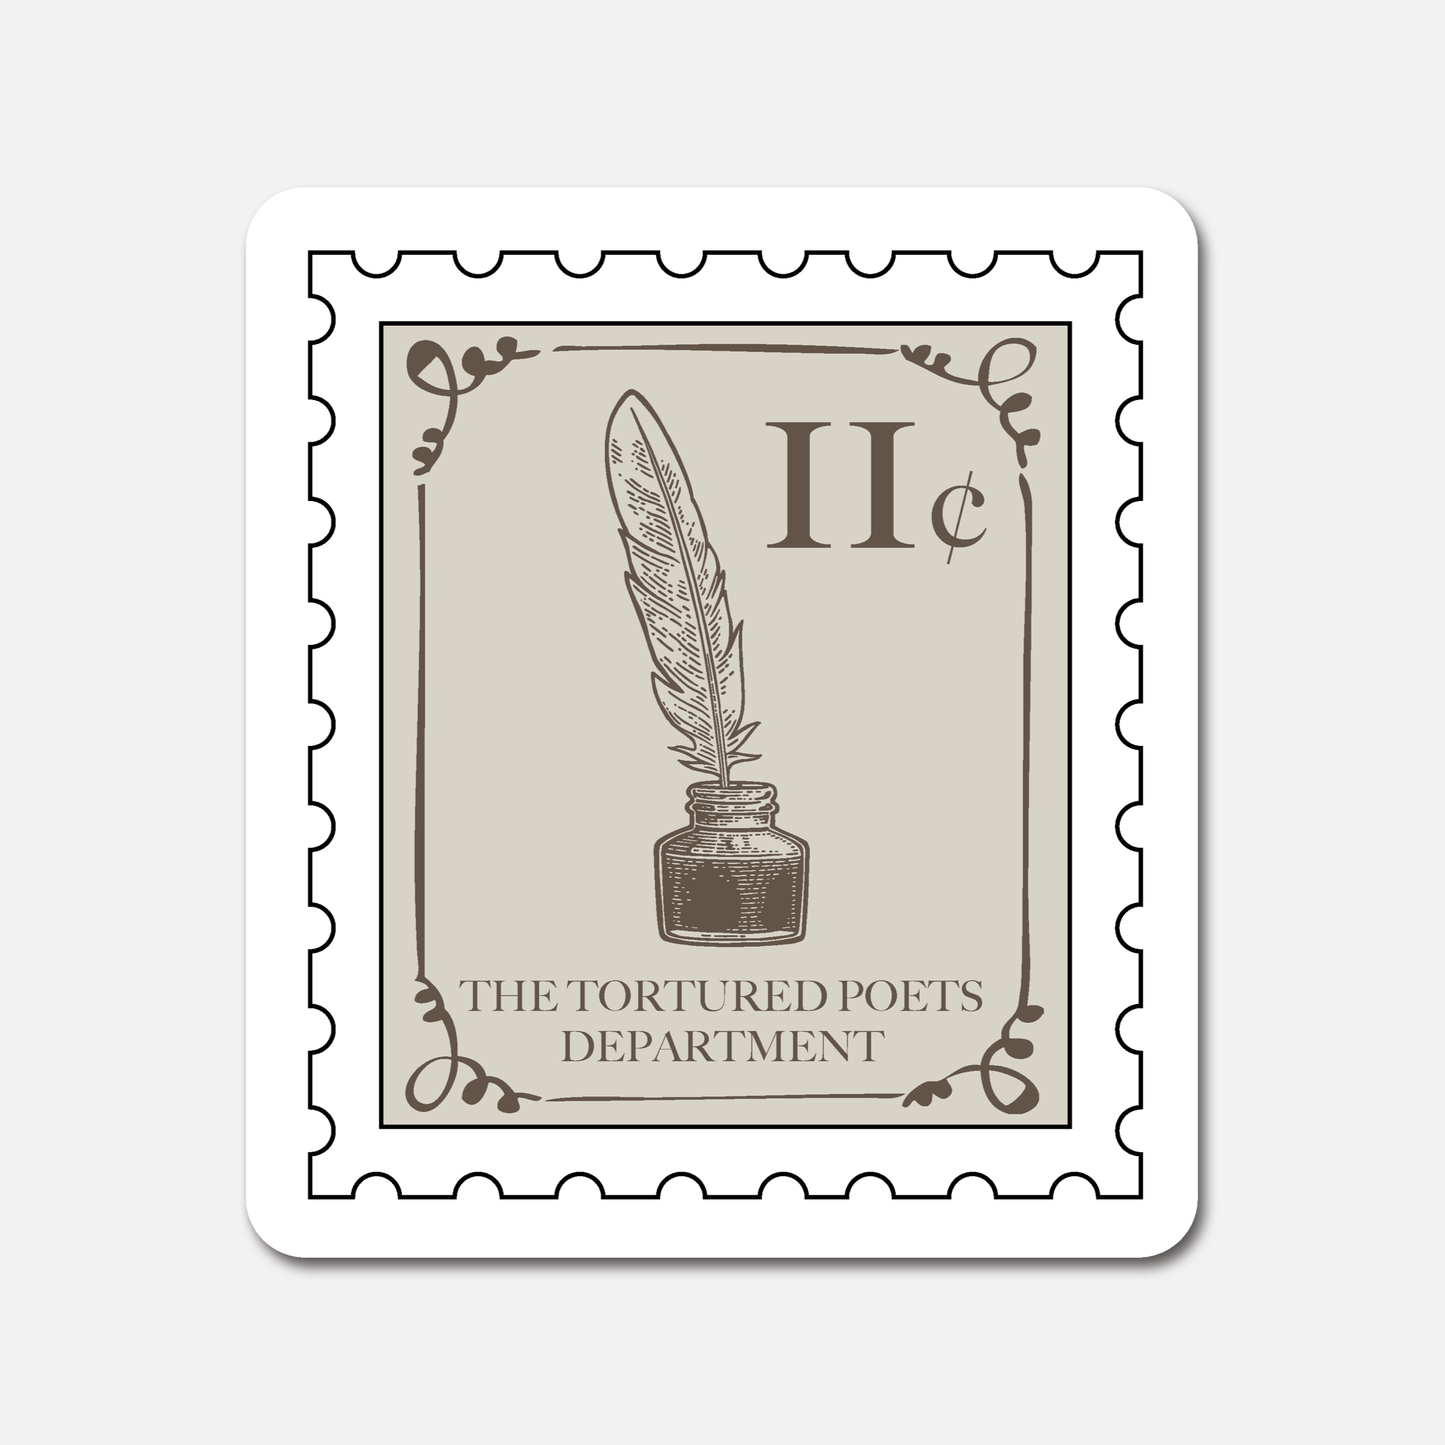 The Tortured Poets Department Stamp  - Taylor Swift Sticker